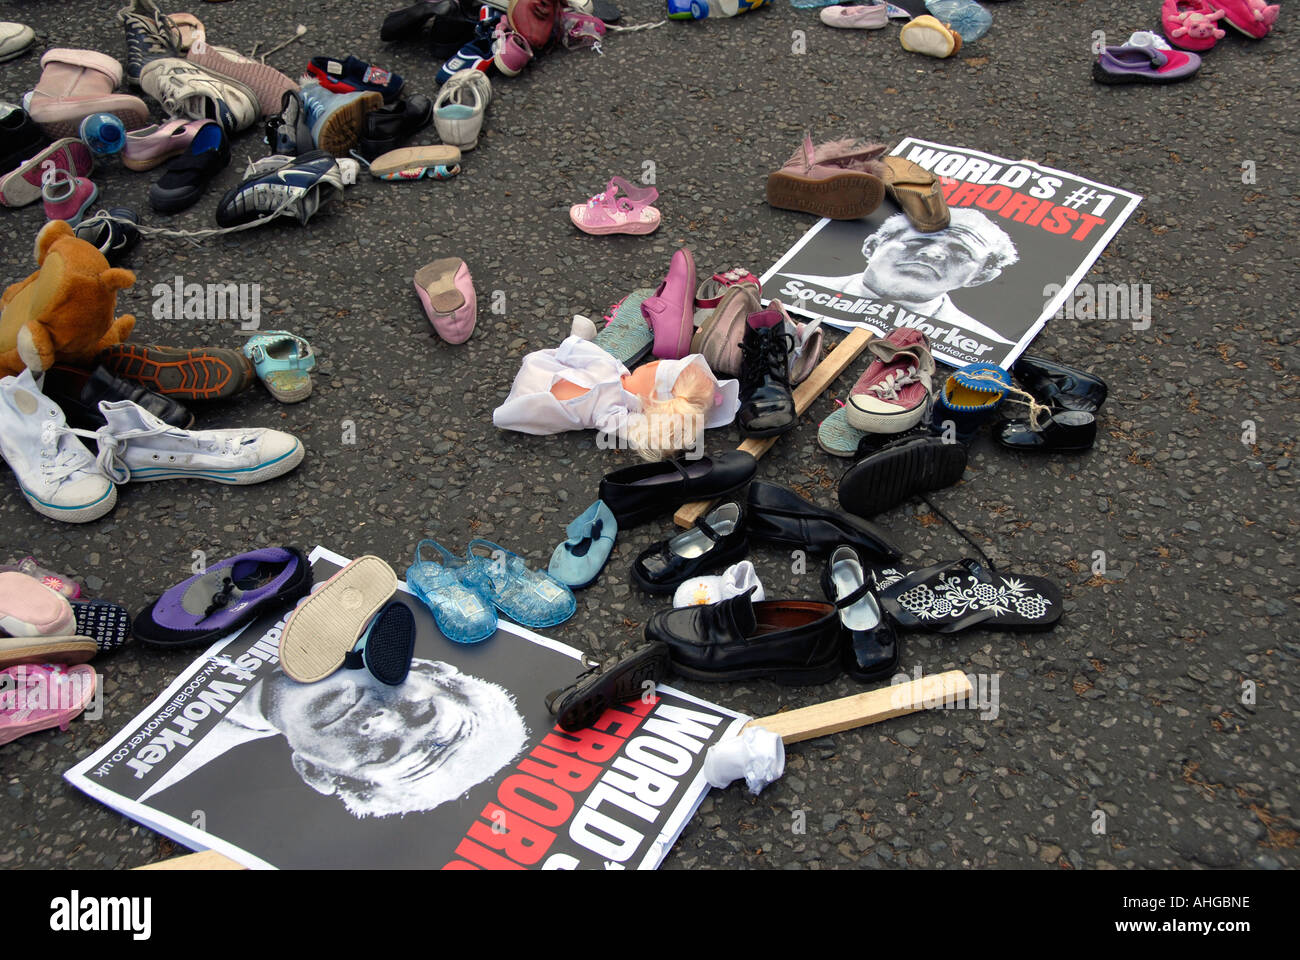 Children's Shoes left by Senatoff in Whitehall  during Stop the War demonstration of more than 100,000 marchers through central Stock Photo